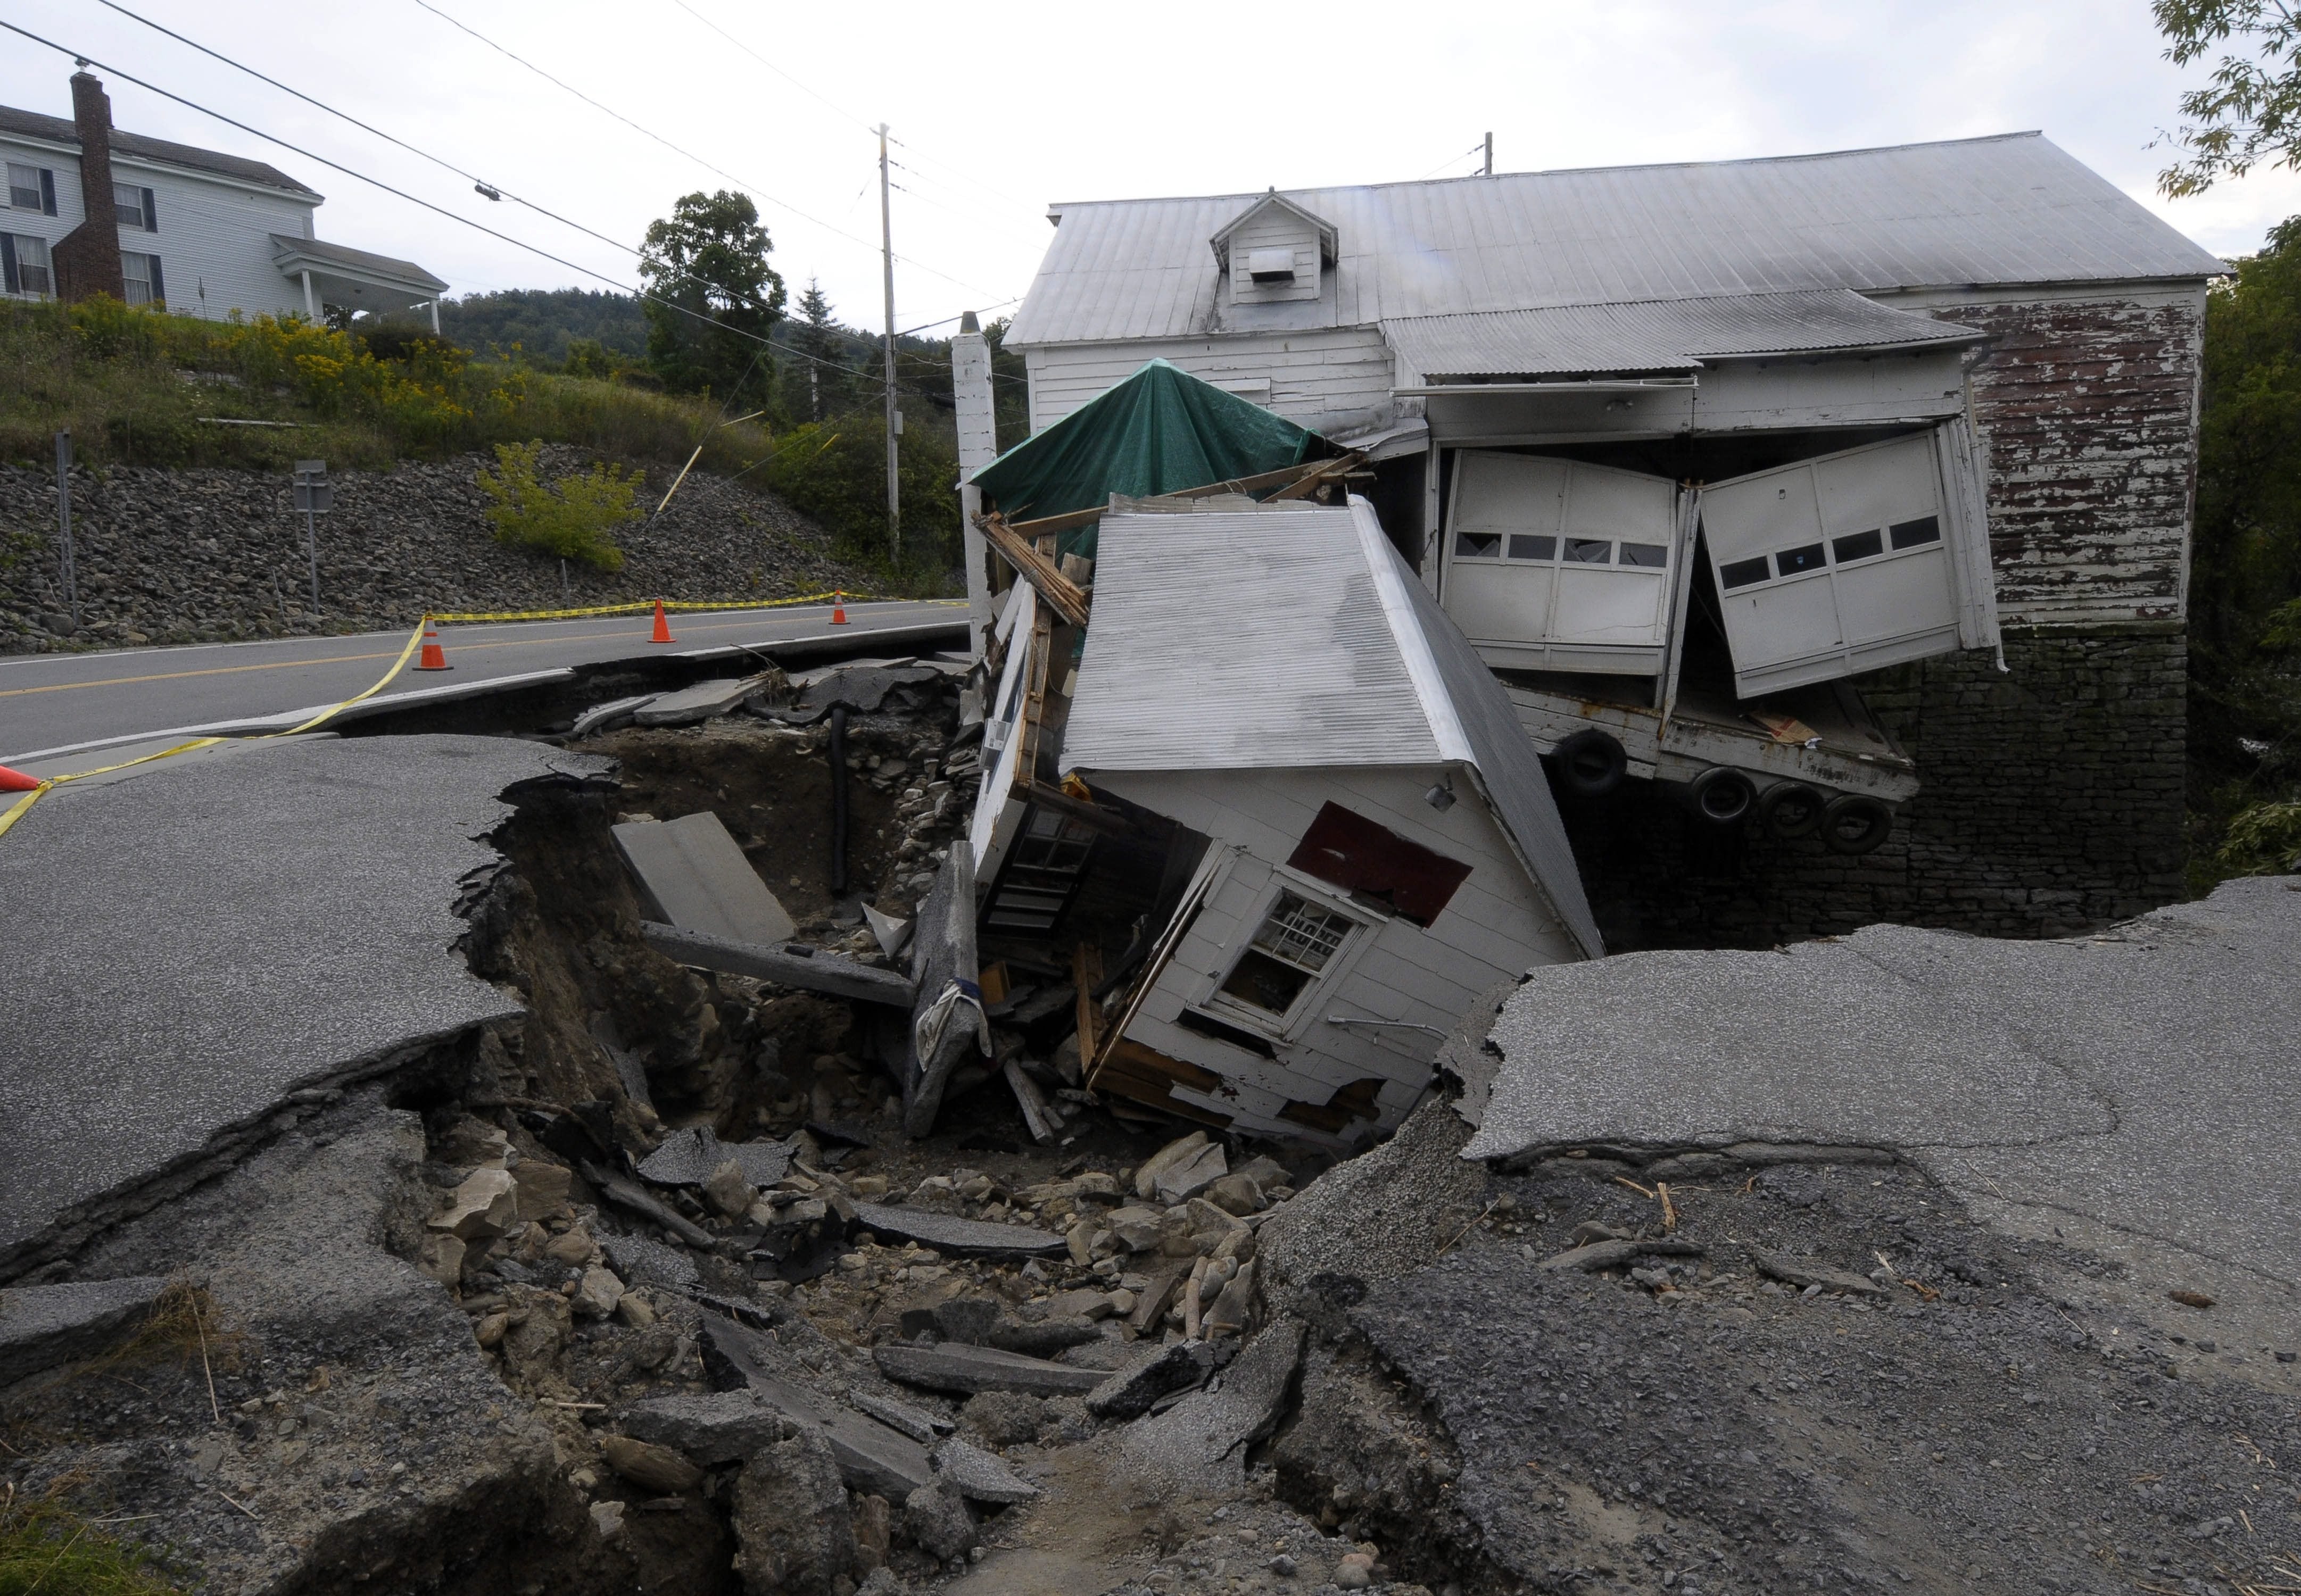 Buildings lie in ruins Thursday on a damaged road as a result of Hurricane Irene in Berne, N.Y.